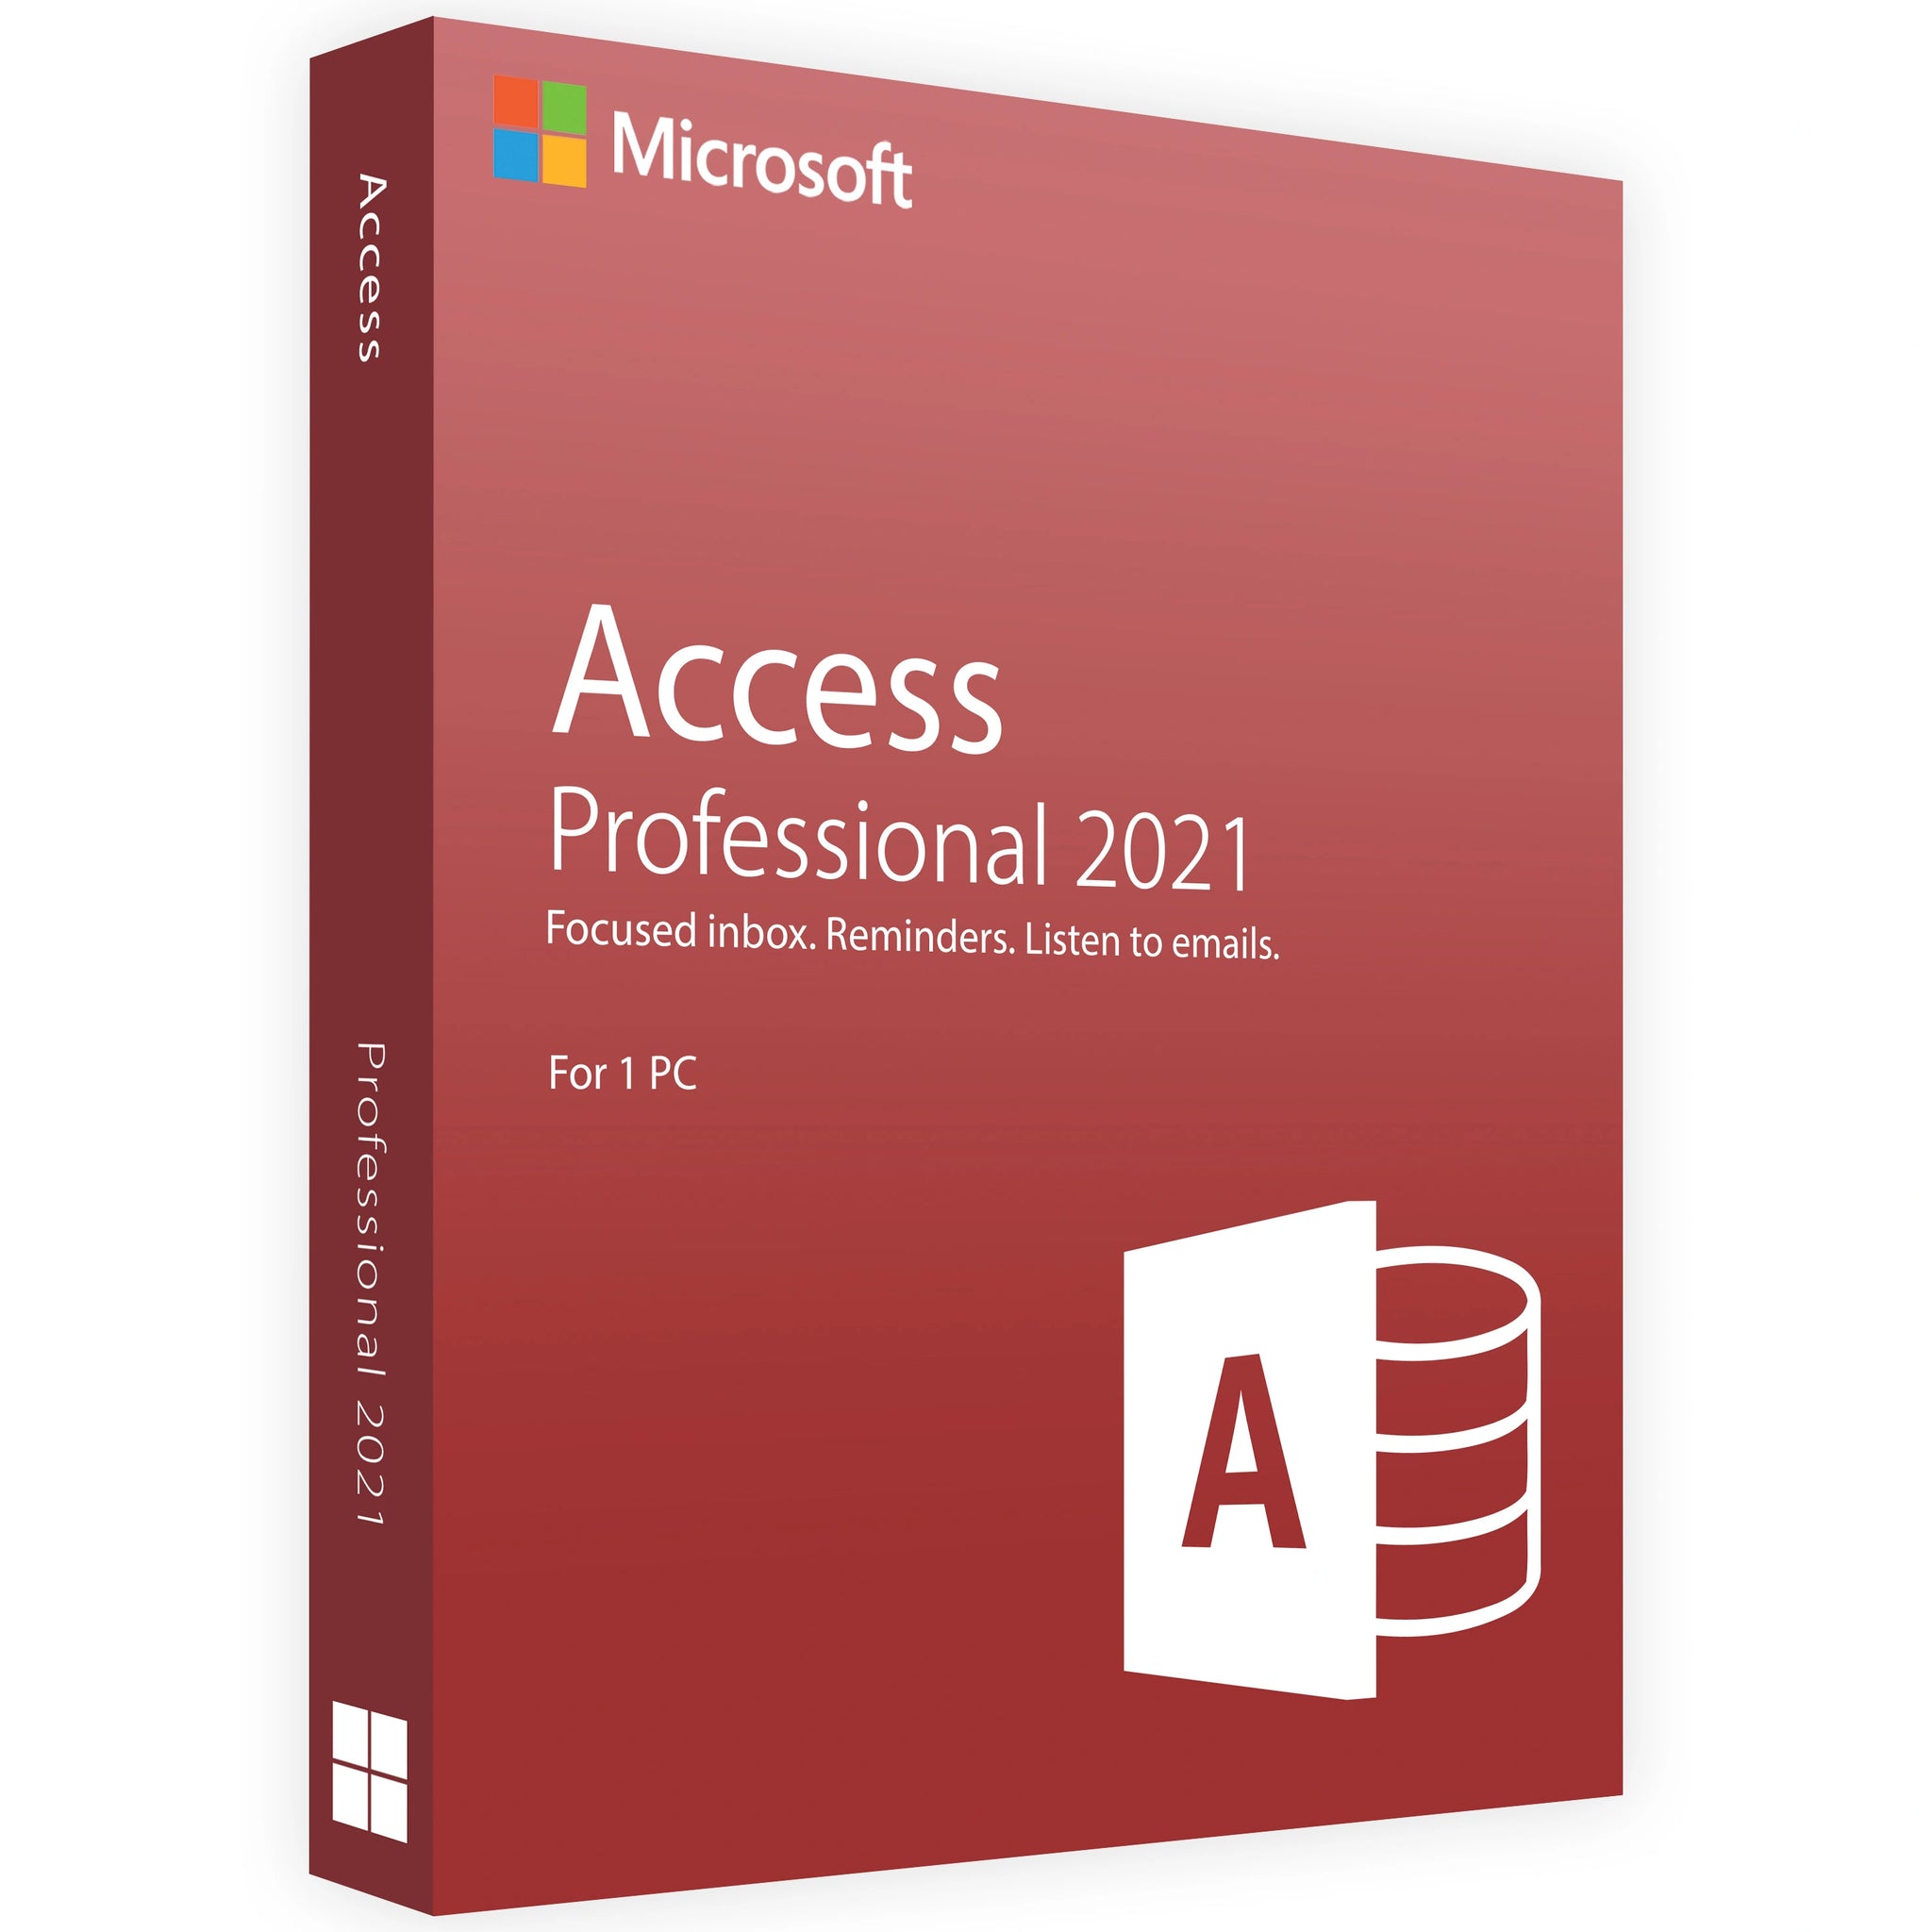 Microsoft Access 2021 Professional- Lifetime License Key for 1 PC